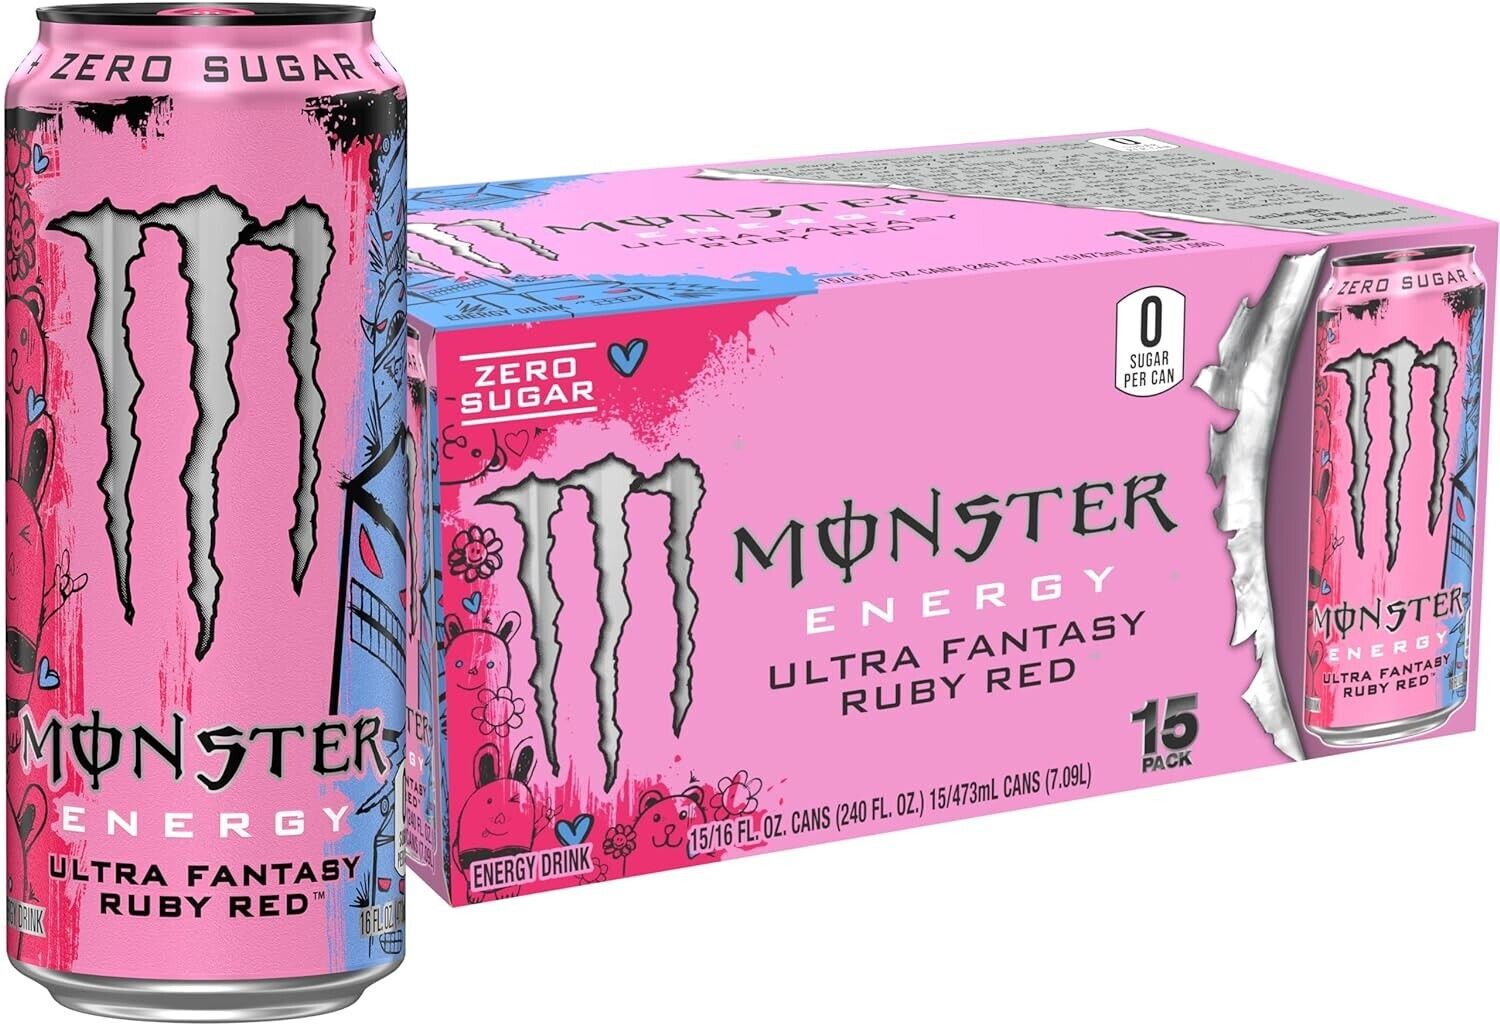 Monster Energy Ultra Fantasy Ruby Red, Sugar Free Energy Drink, 16 Ounce